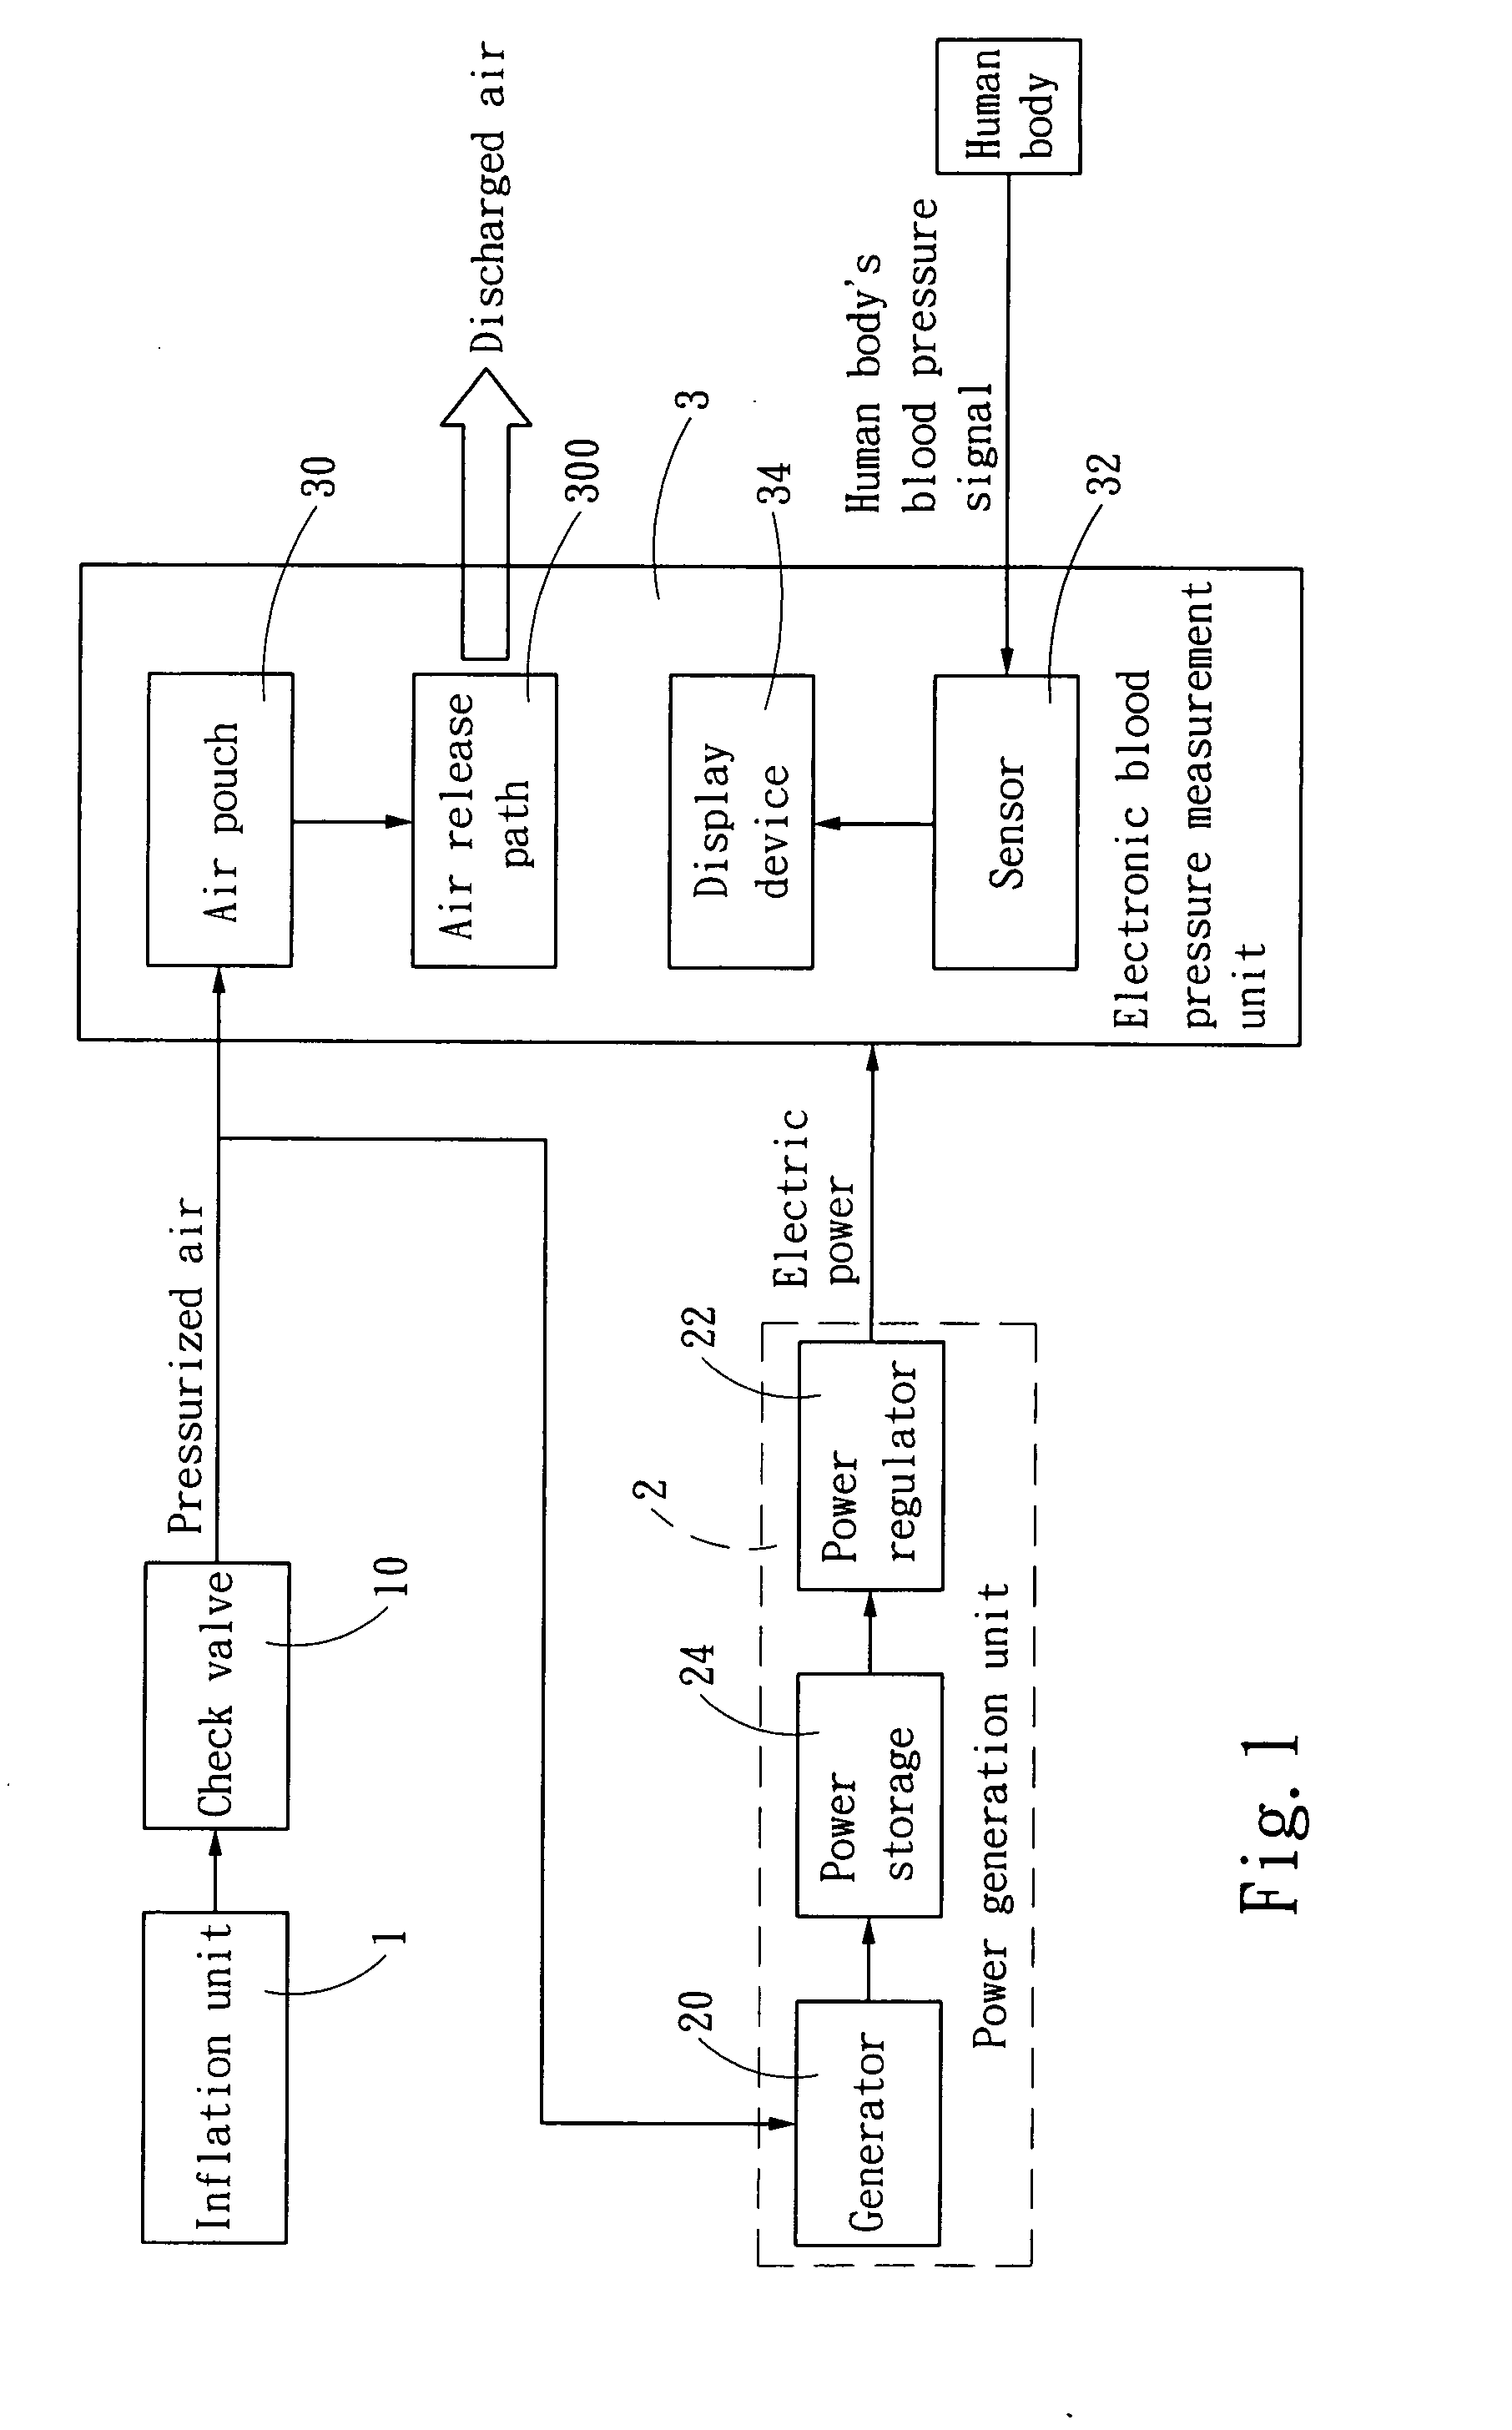 Manual-driven inflation-powered electronic blood pressure measuring apparatus